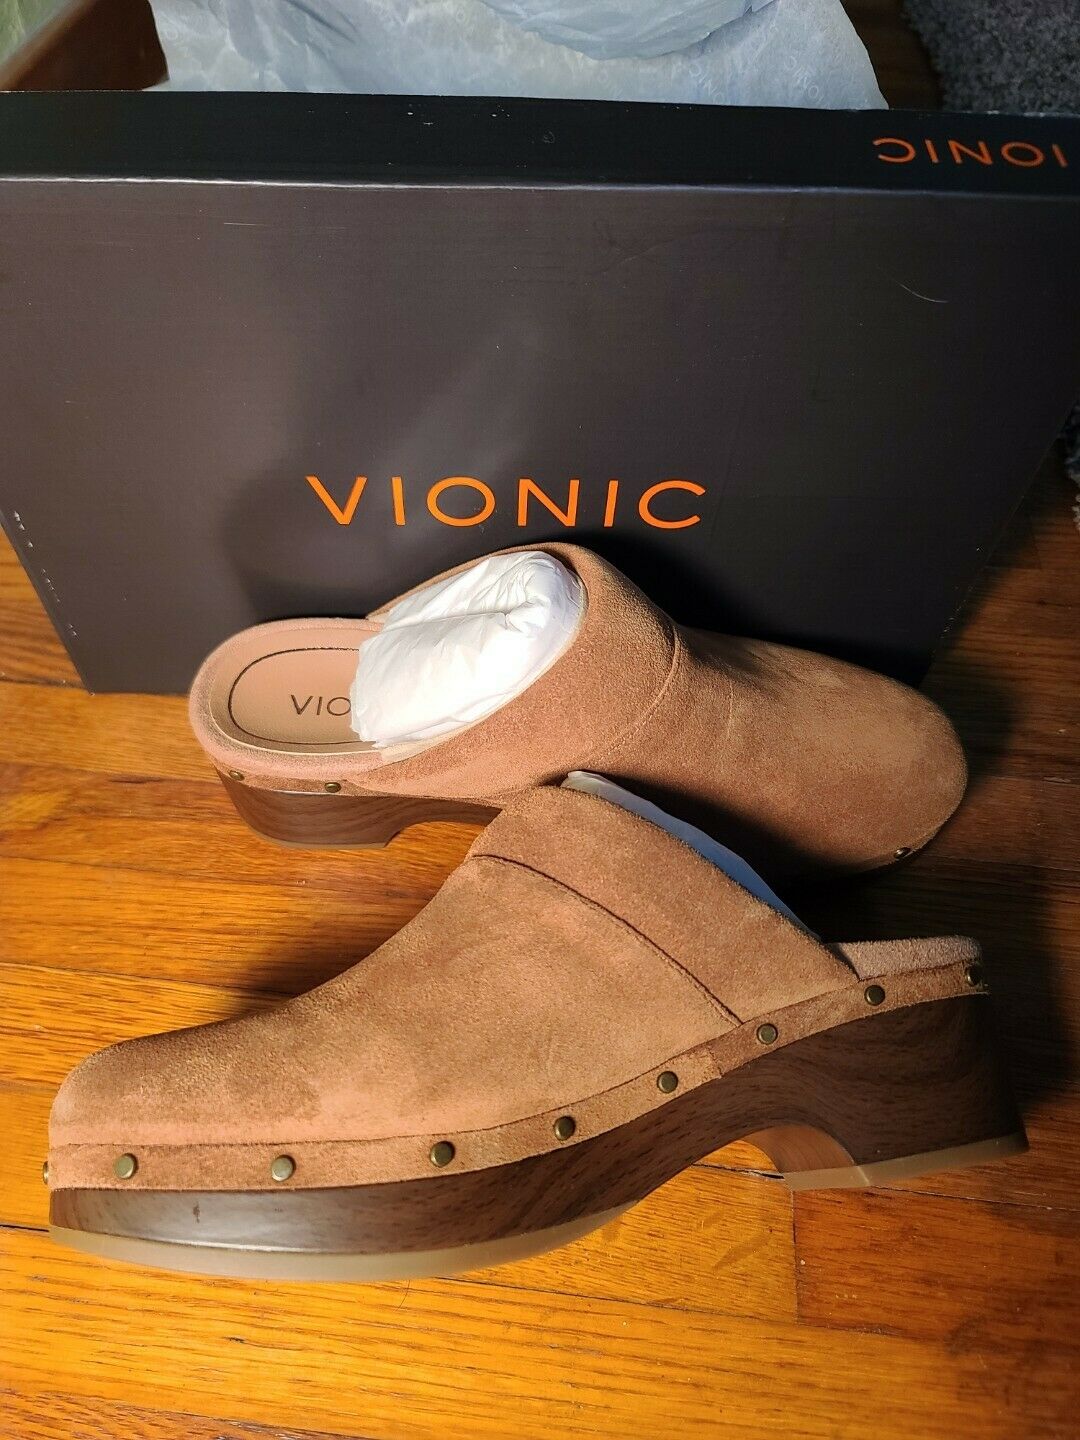 VIONIC Women's "Day Kacie" toffee color Clog Shoes Size 7 New in box